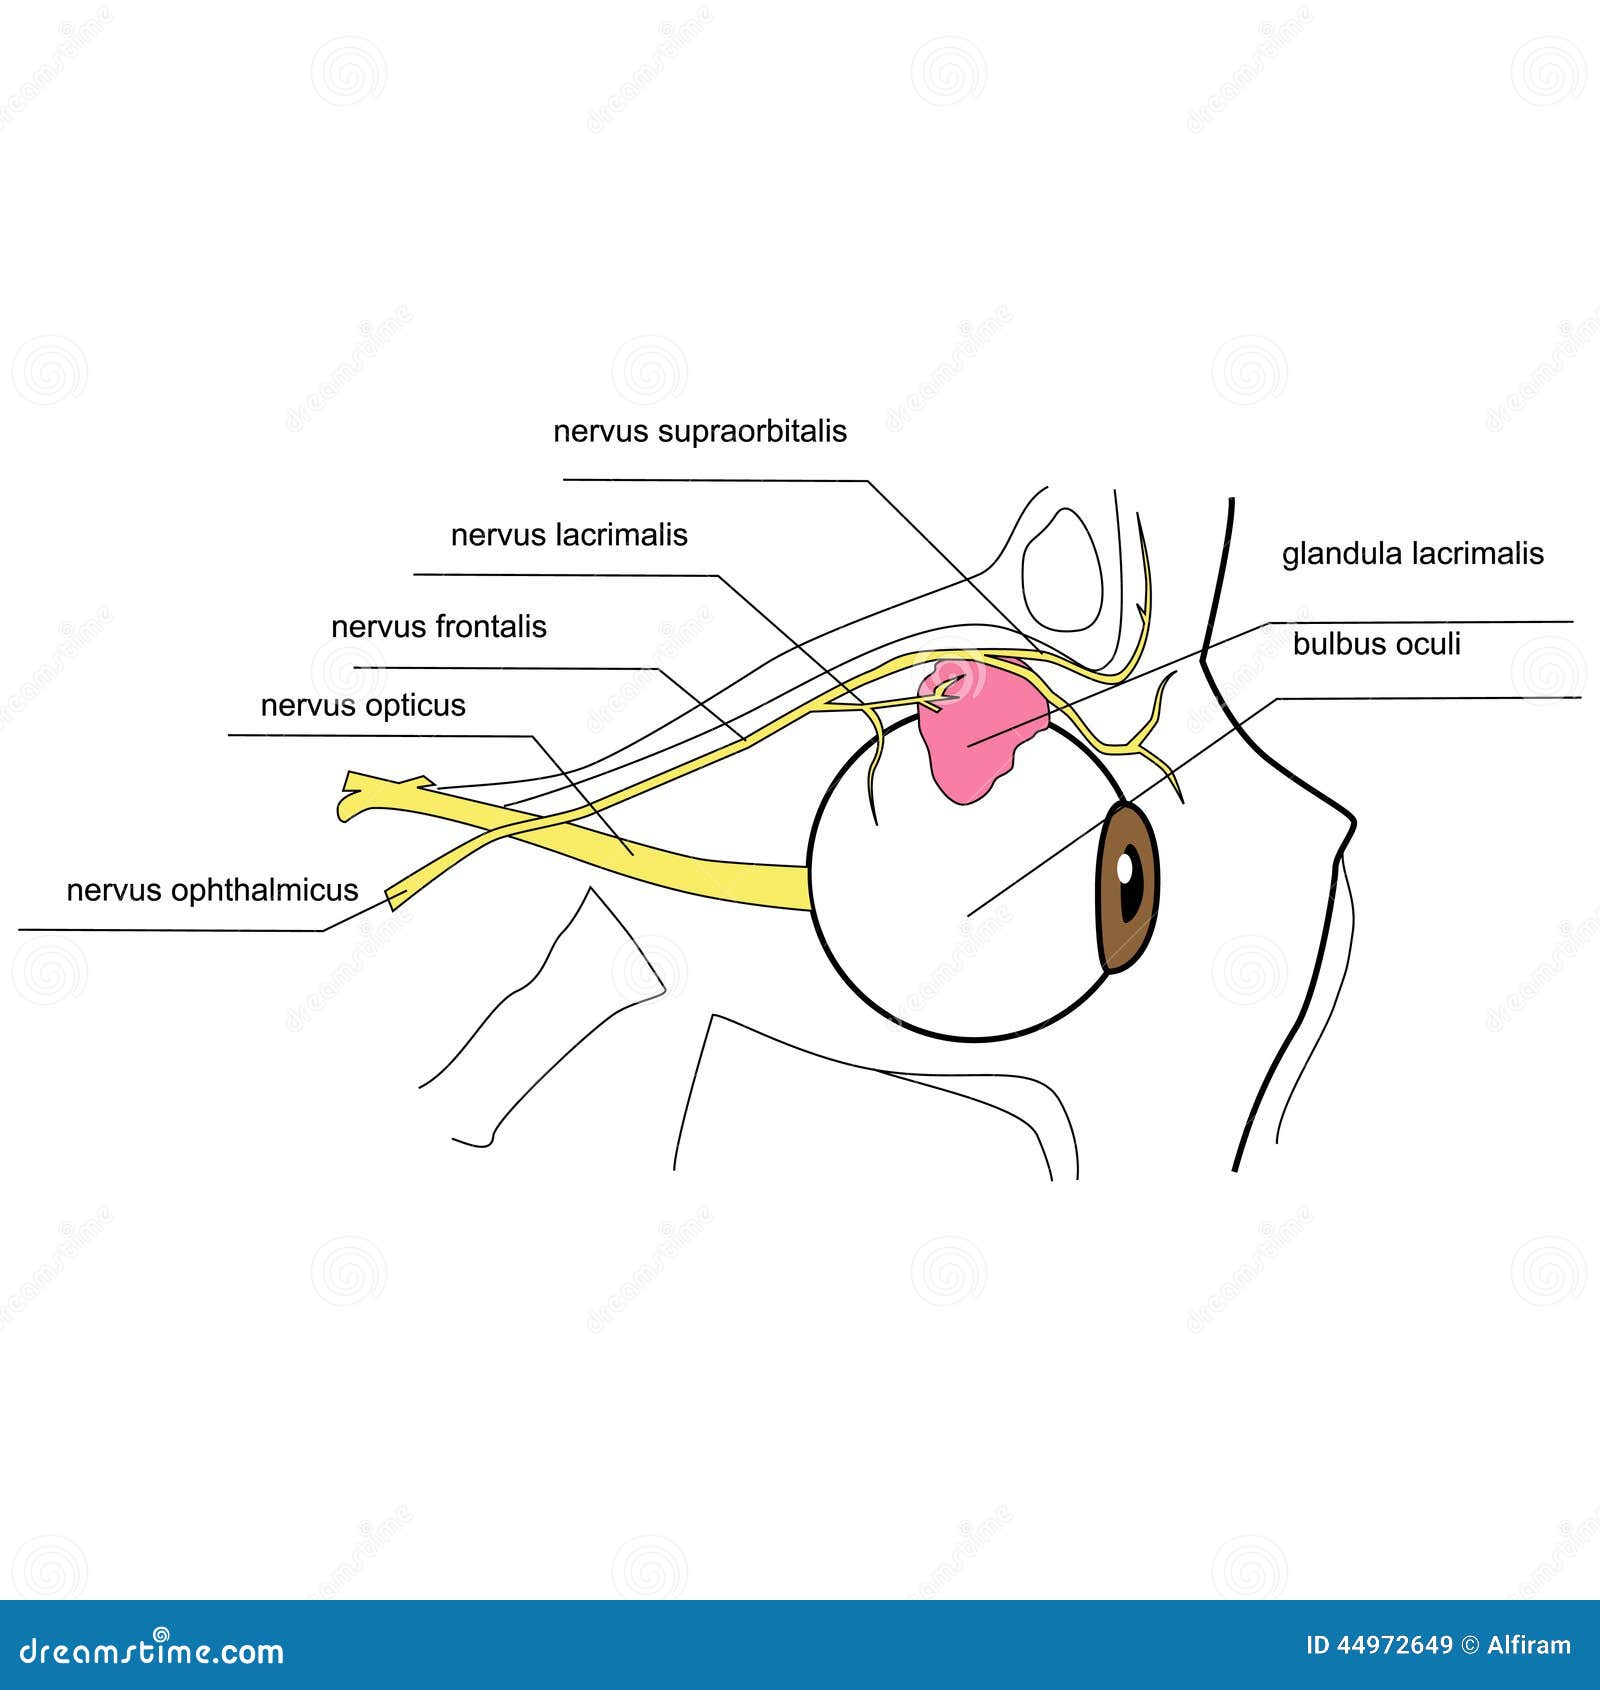 innervation of the lacrimal gland - side view